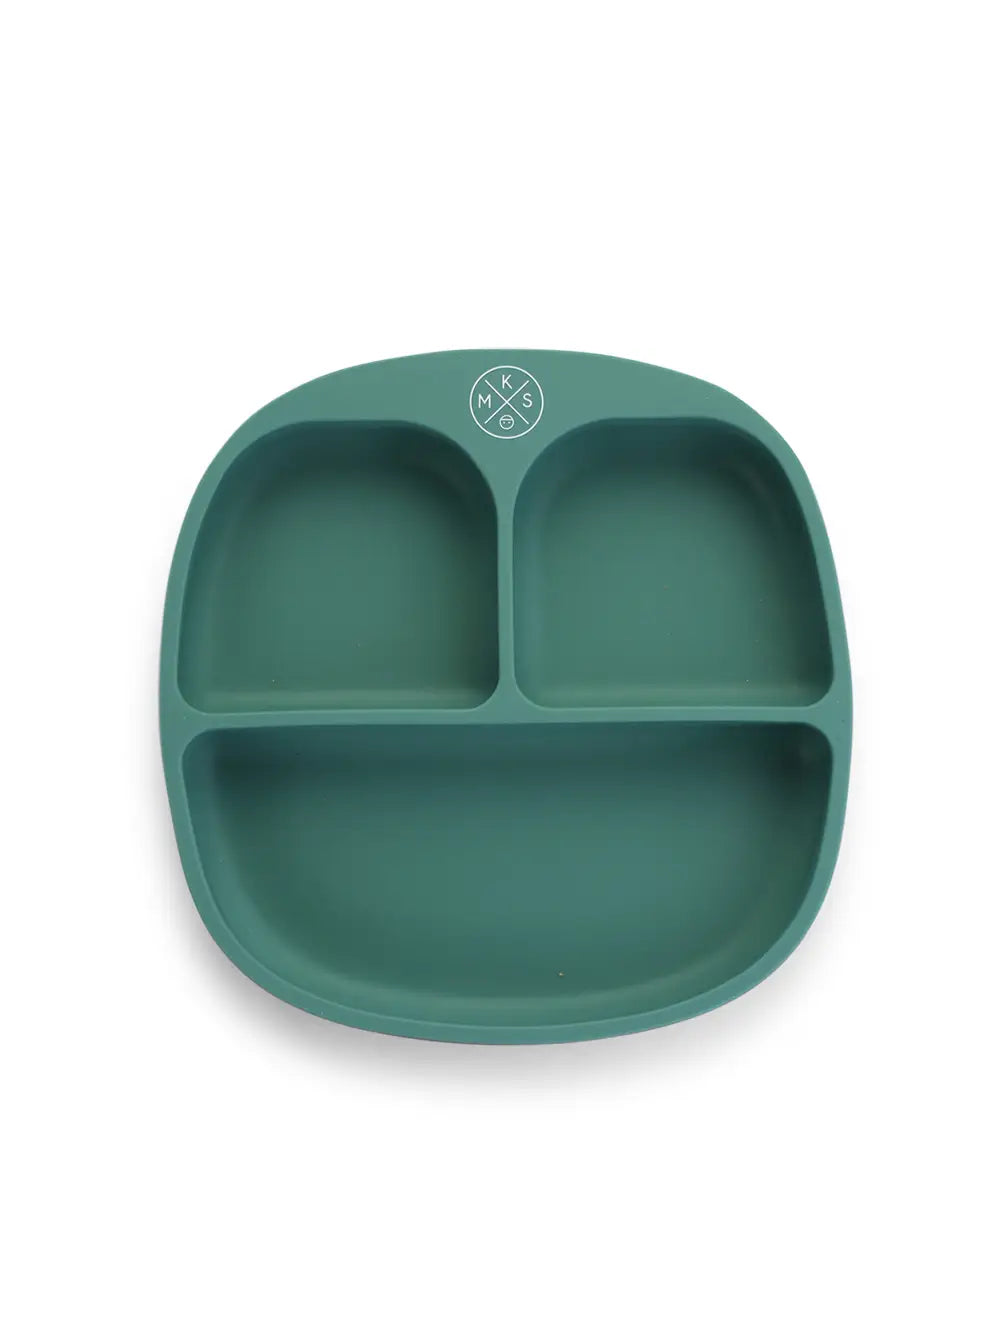 Silicone Suction Kids Plate w/ Dividing Sections - Lulie